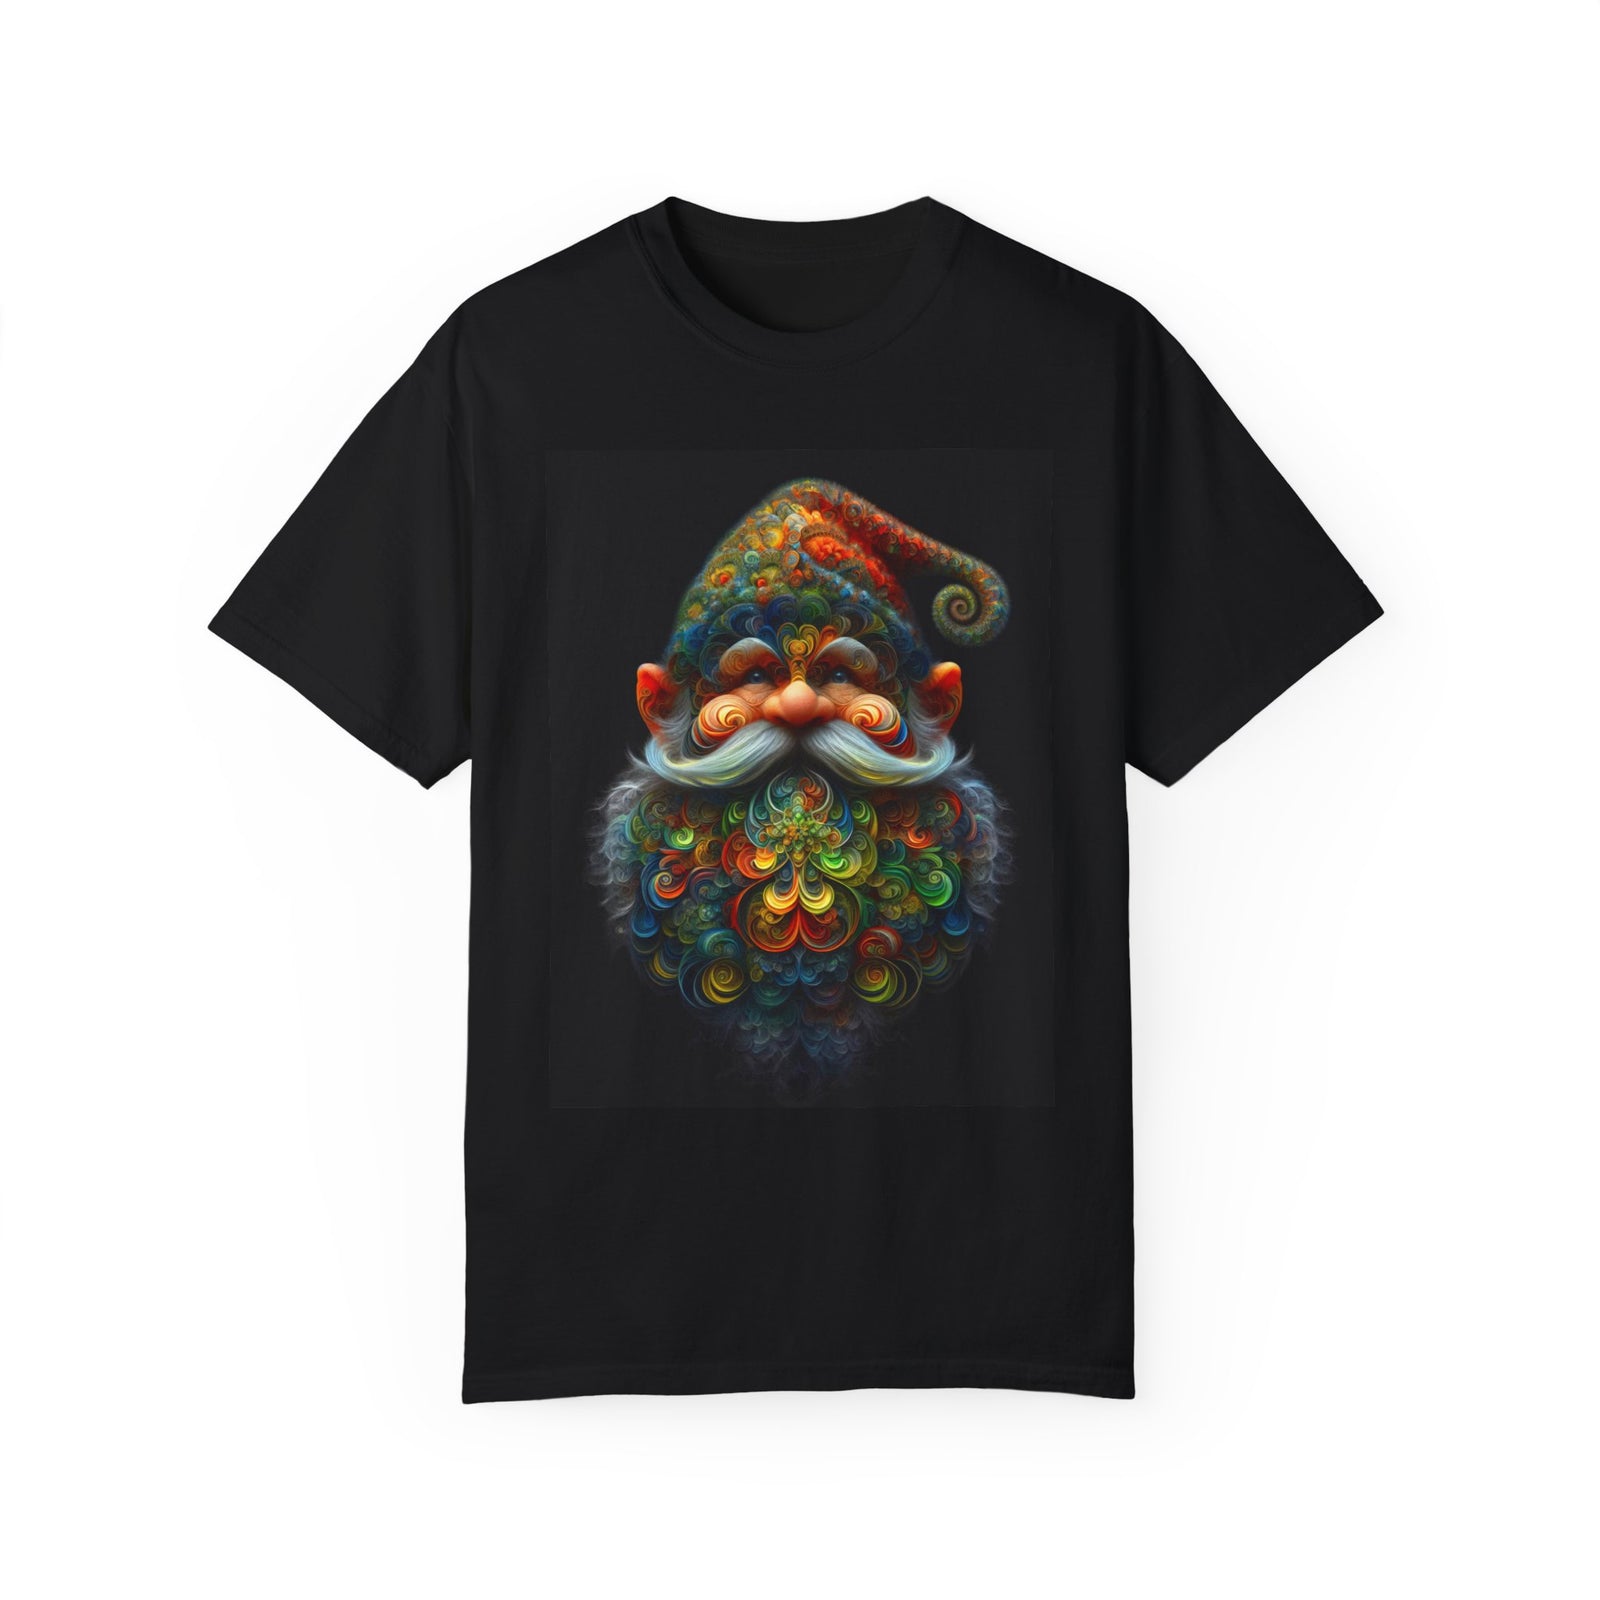 Gnarly the Gnome Unisex Garment-Dyed T-shirt